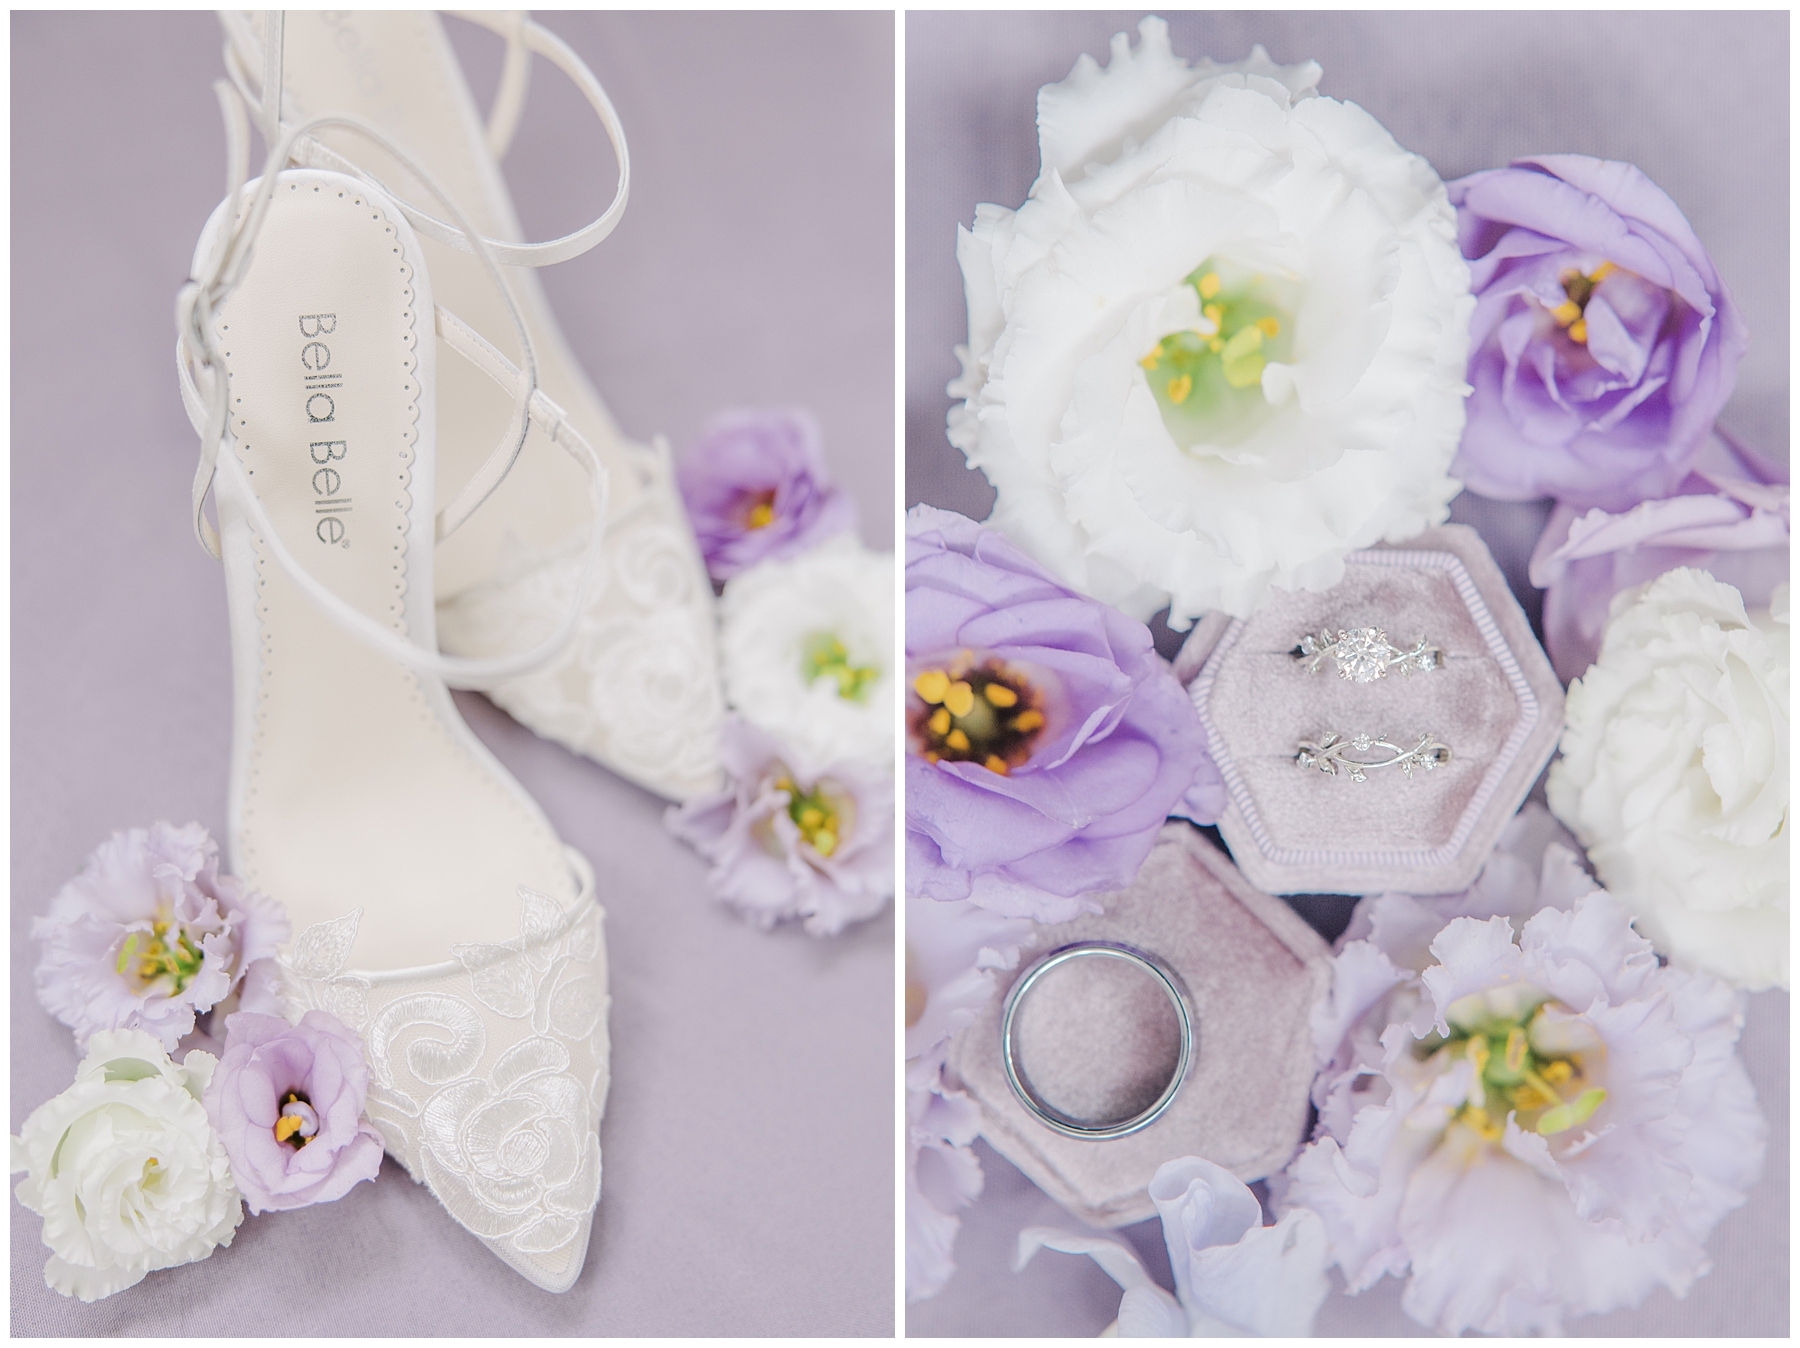 wedding shoes and rings surrounded by white and purple flowers